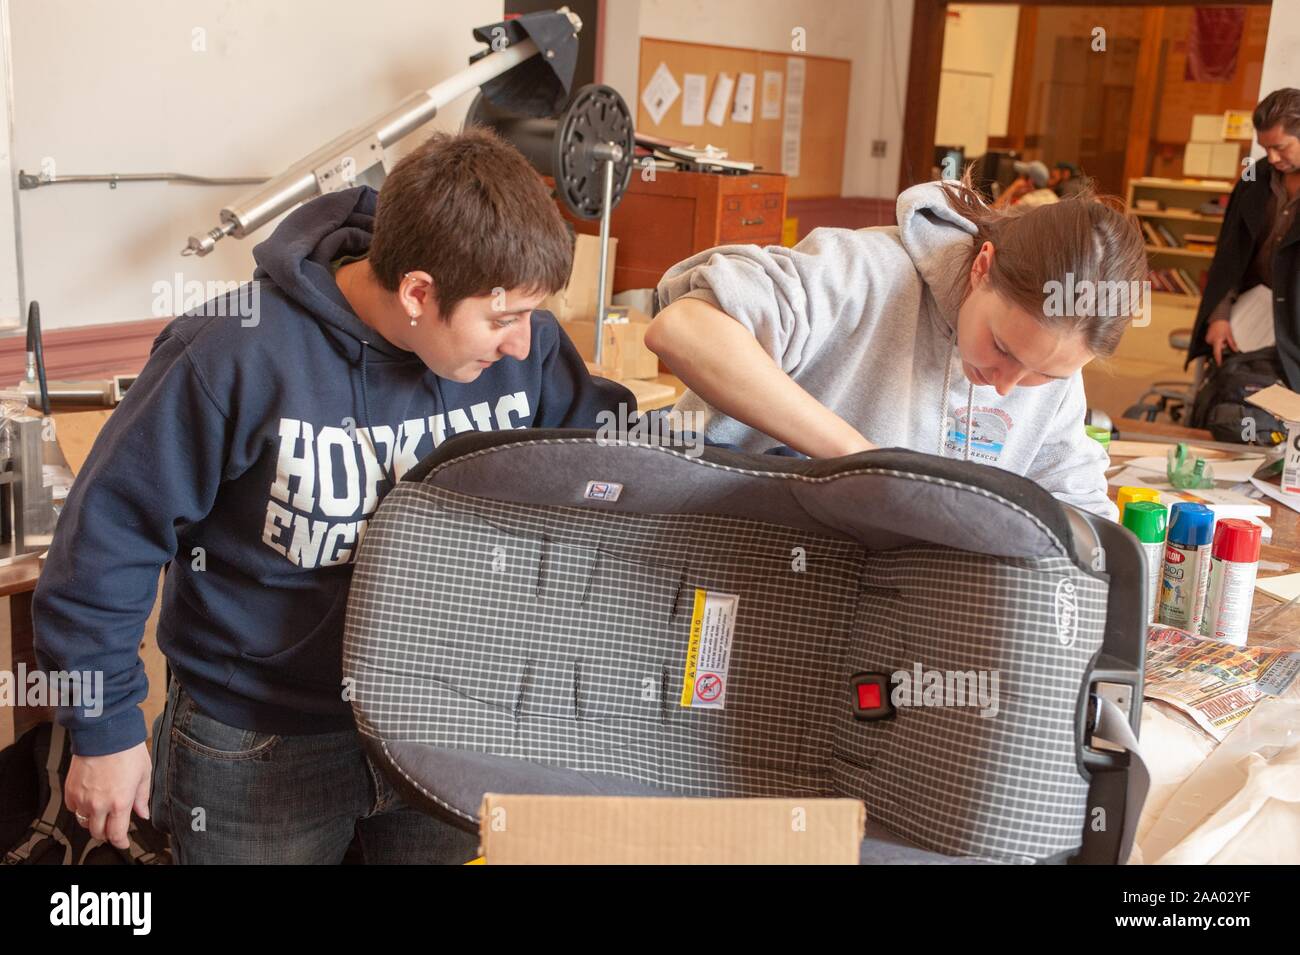 A pair of Whiting School of Engineering Design Team students work on a child's car seat project in a machine shop at the Johns Hopkins University, Baltimore, Maryland, March 31, 2009. From the Homewood Photography Collection. () Stock Photo